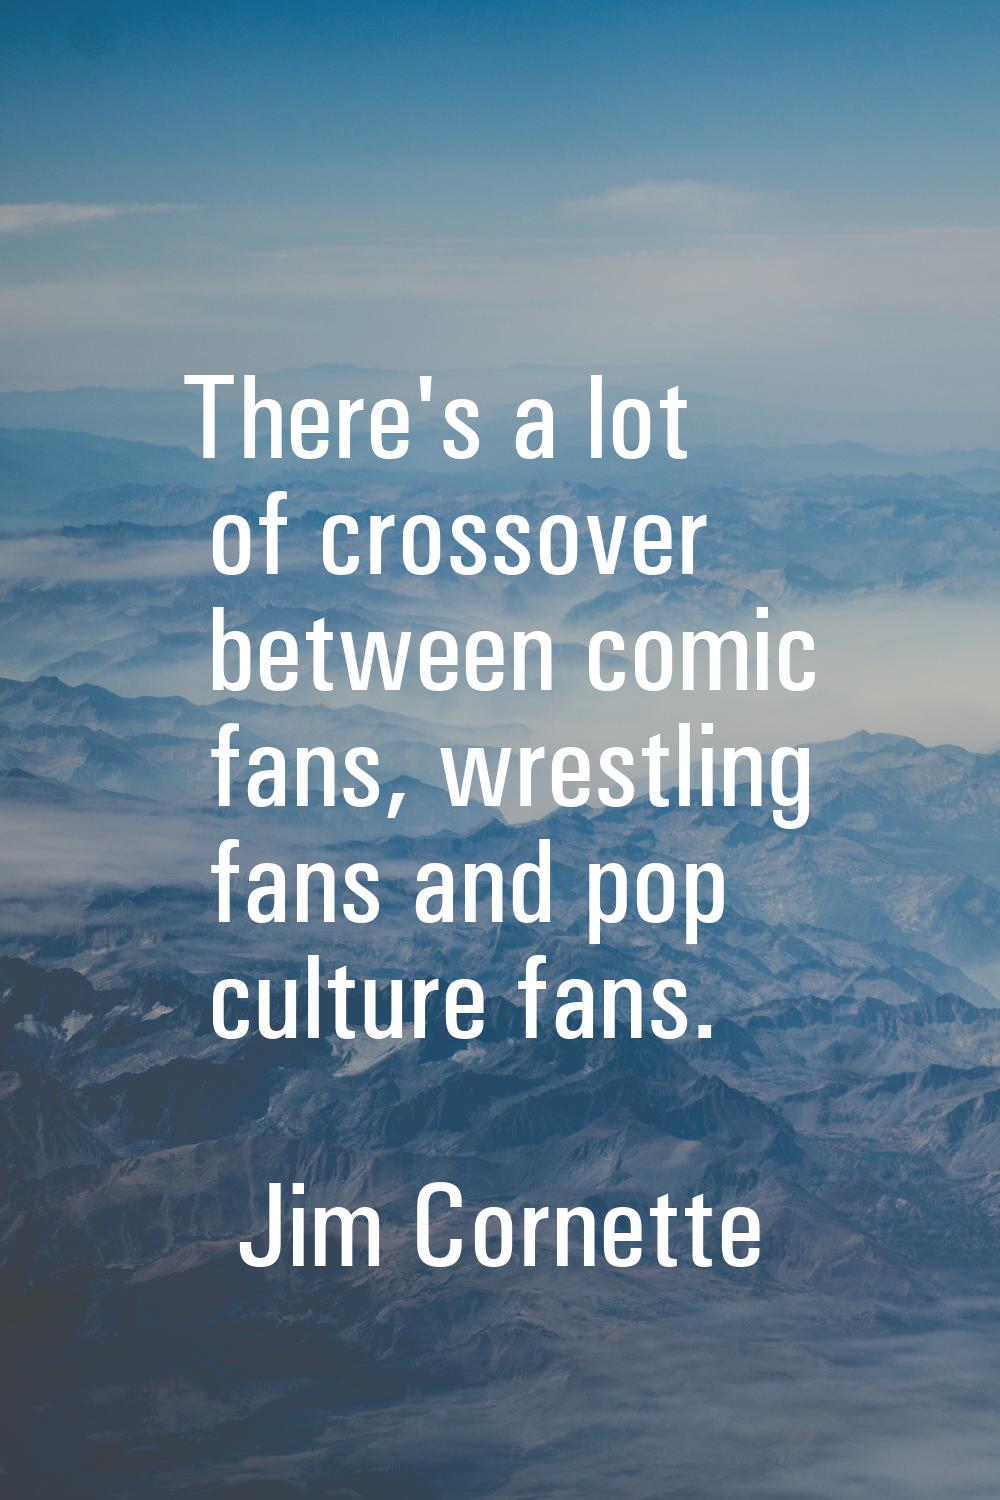 There's a lot of crossover between comic fans, wrestling fans and pop culture fans.